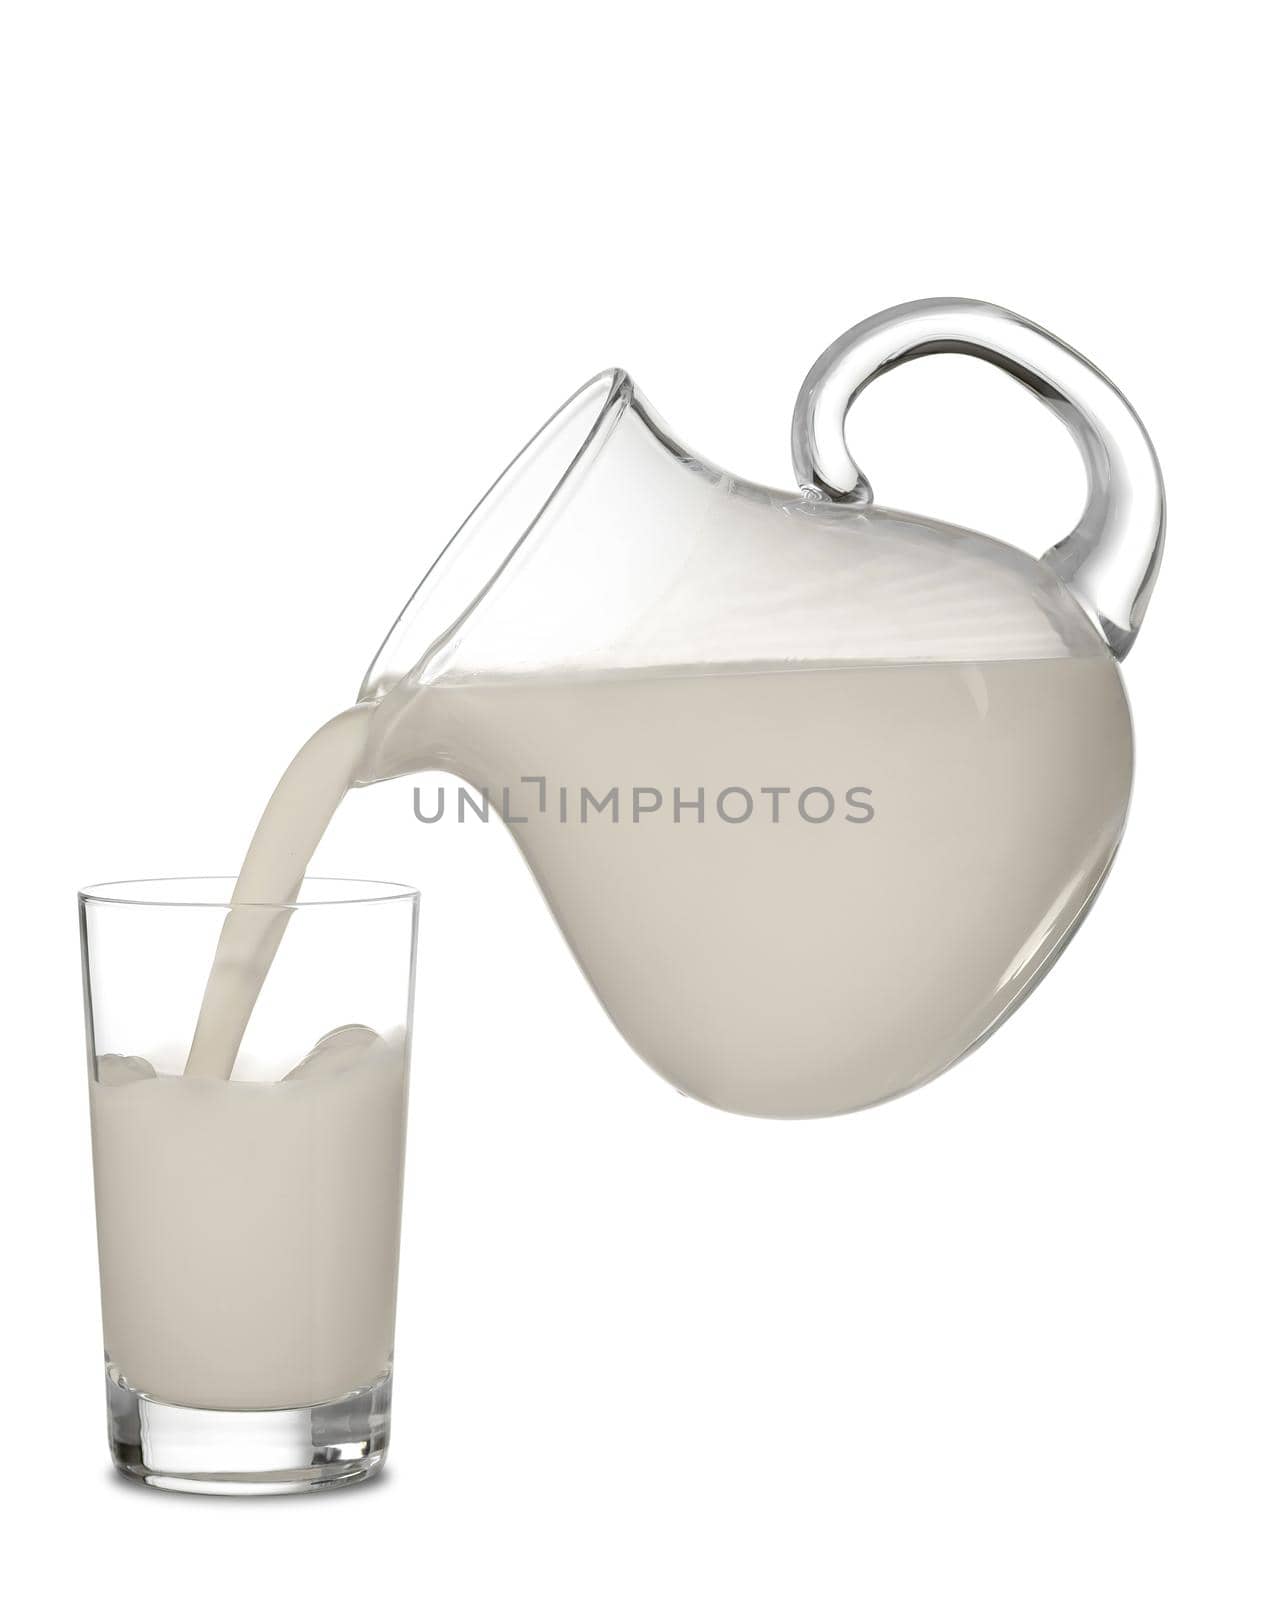 Almond milk is poured from a transparent jug into a glass. Isolated on white background.